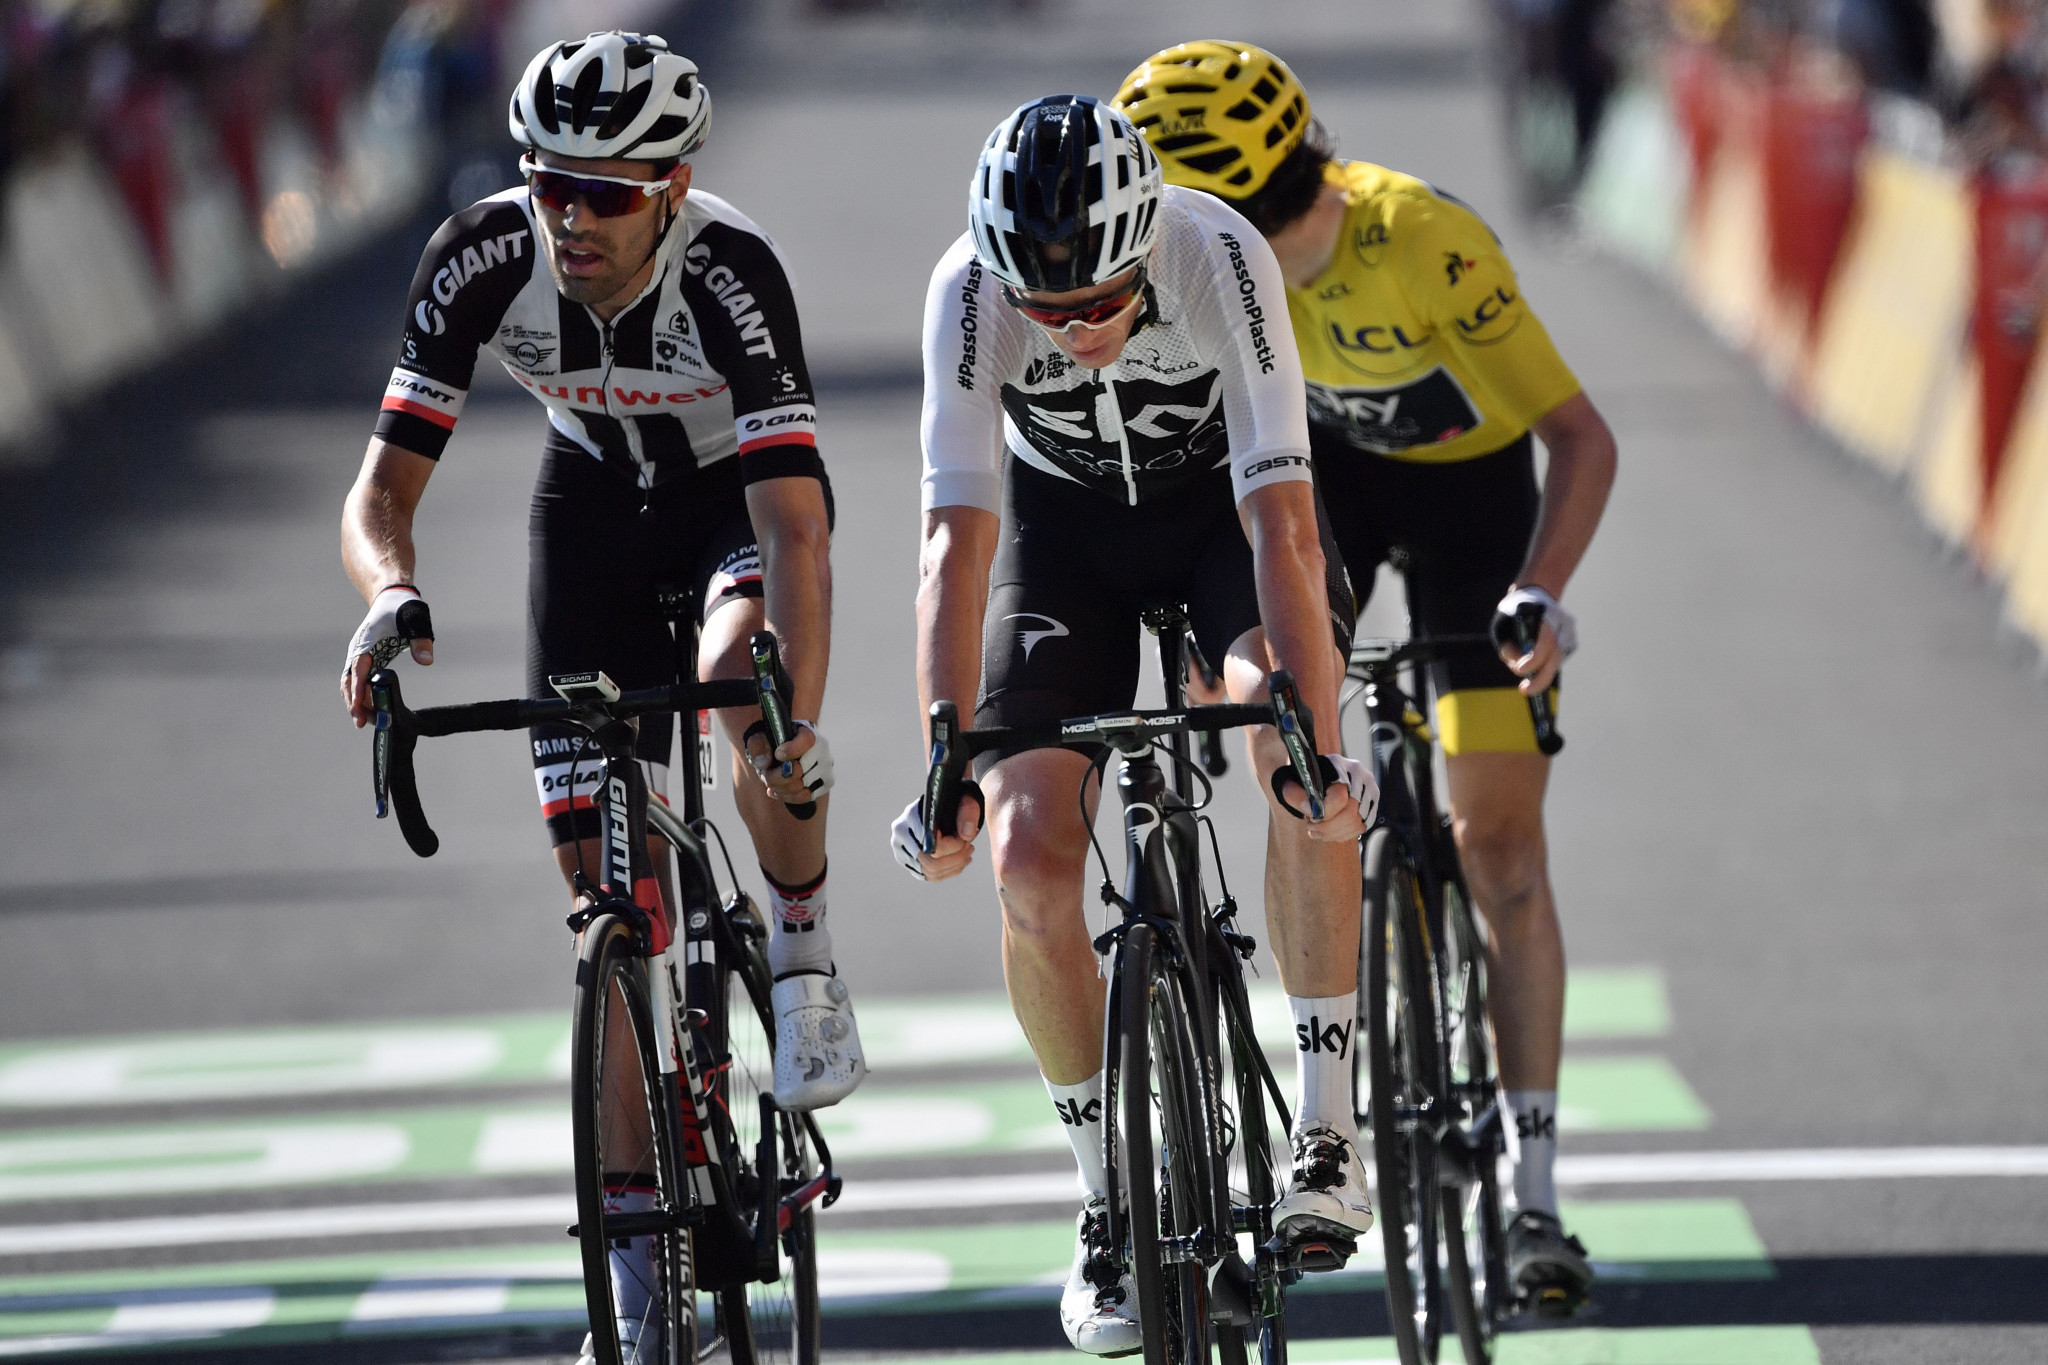 The general classification contenders, including Britain's defending champion Chris Froome, centre, and the current yellow jersey in the race, Geraint Thomas, right, finished together on the stage ©Getty Images